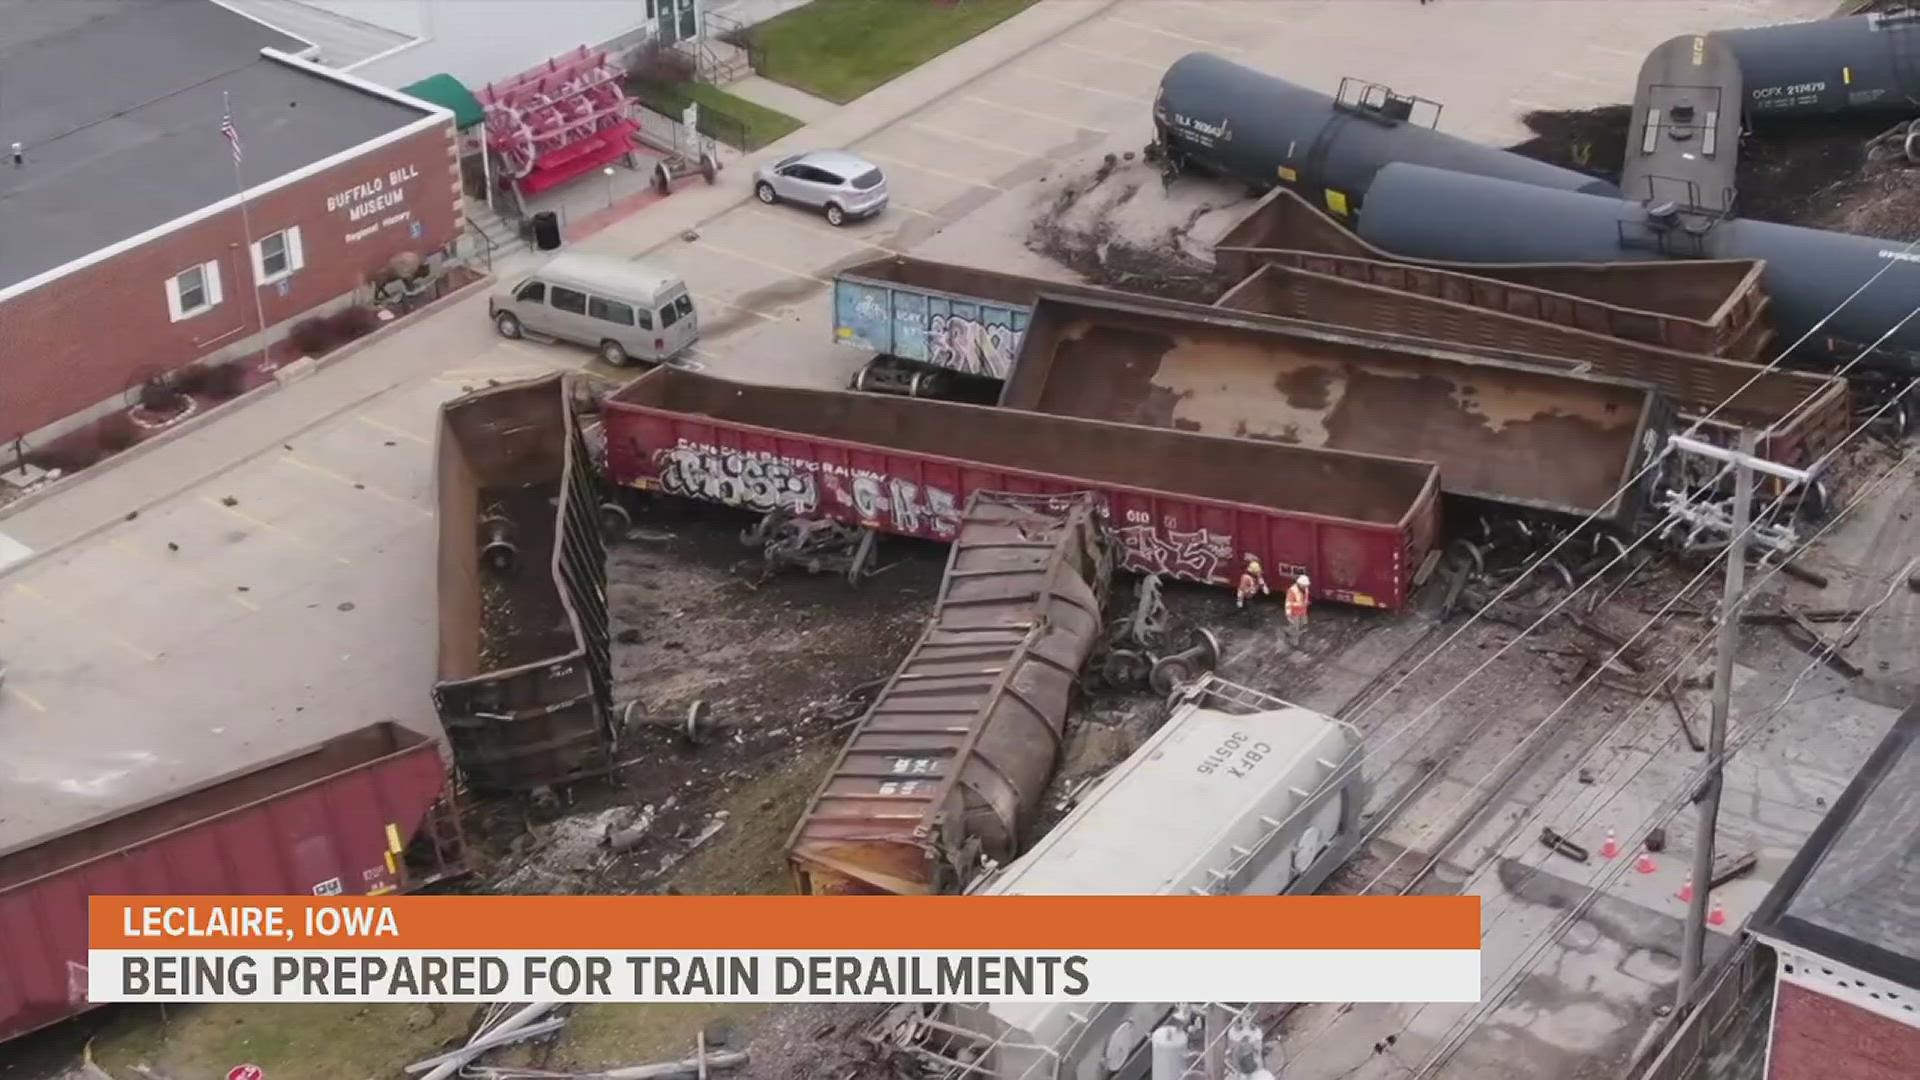 The East Palestine derailment has Americans wondering if their first responders are ready for a similar incident in their hometown. Here's what we found out.